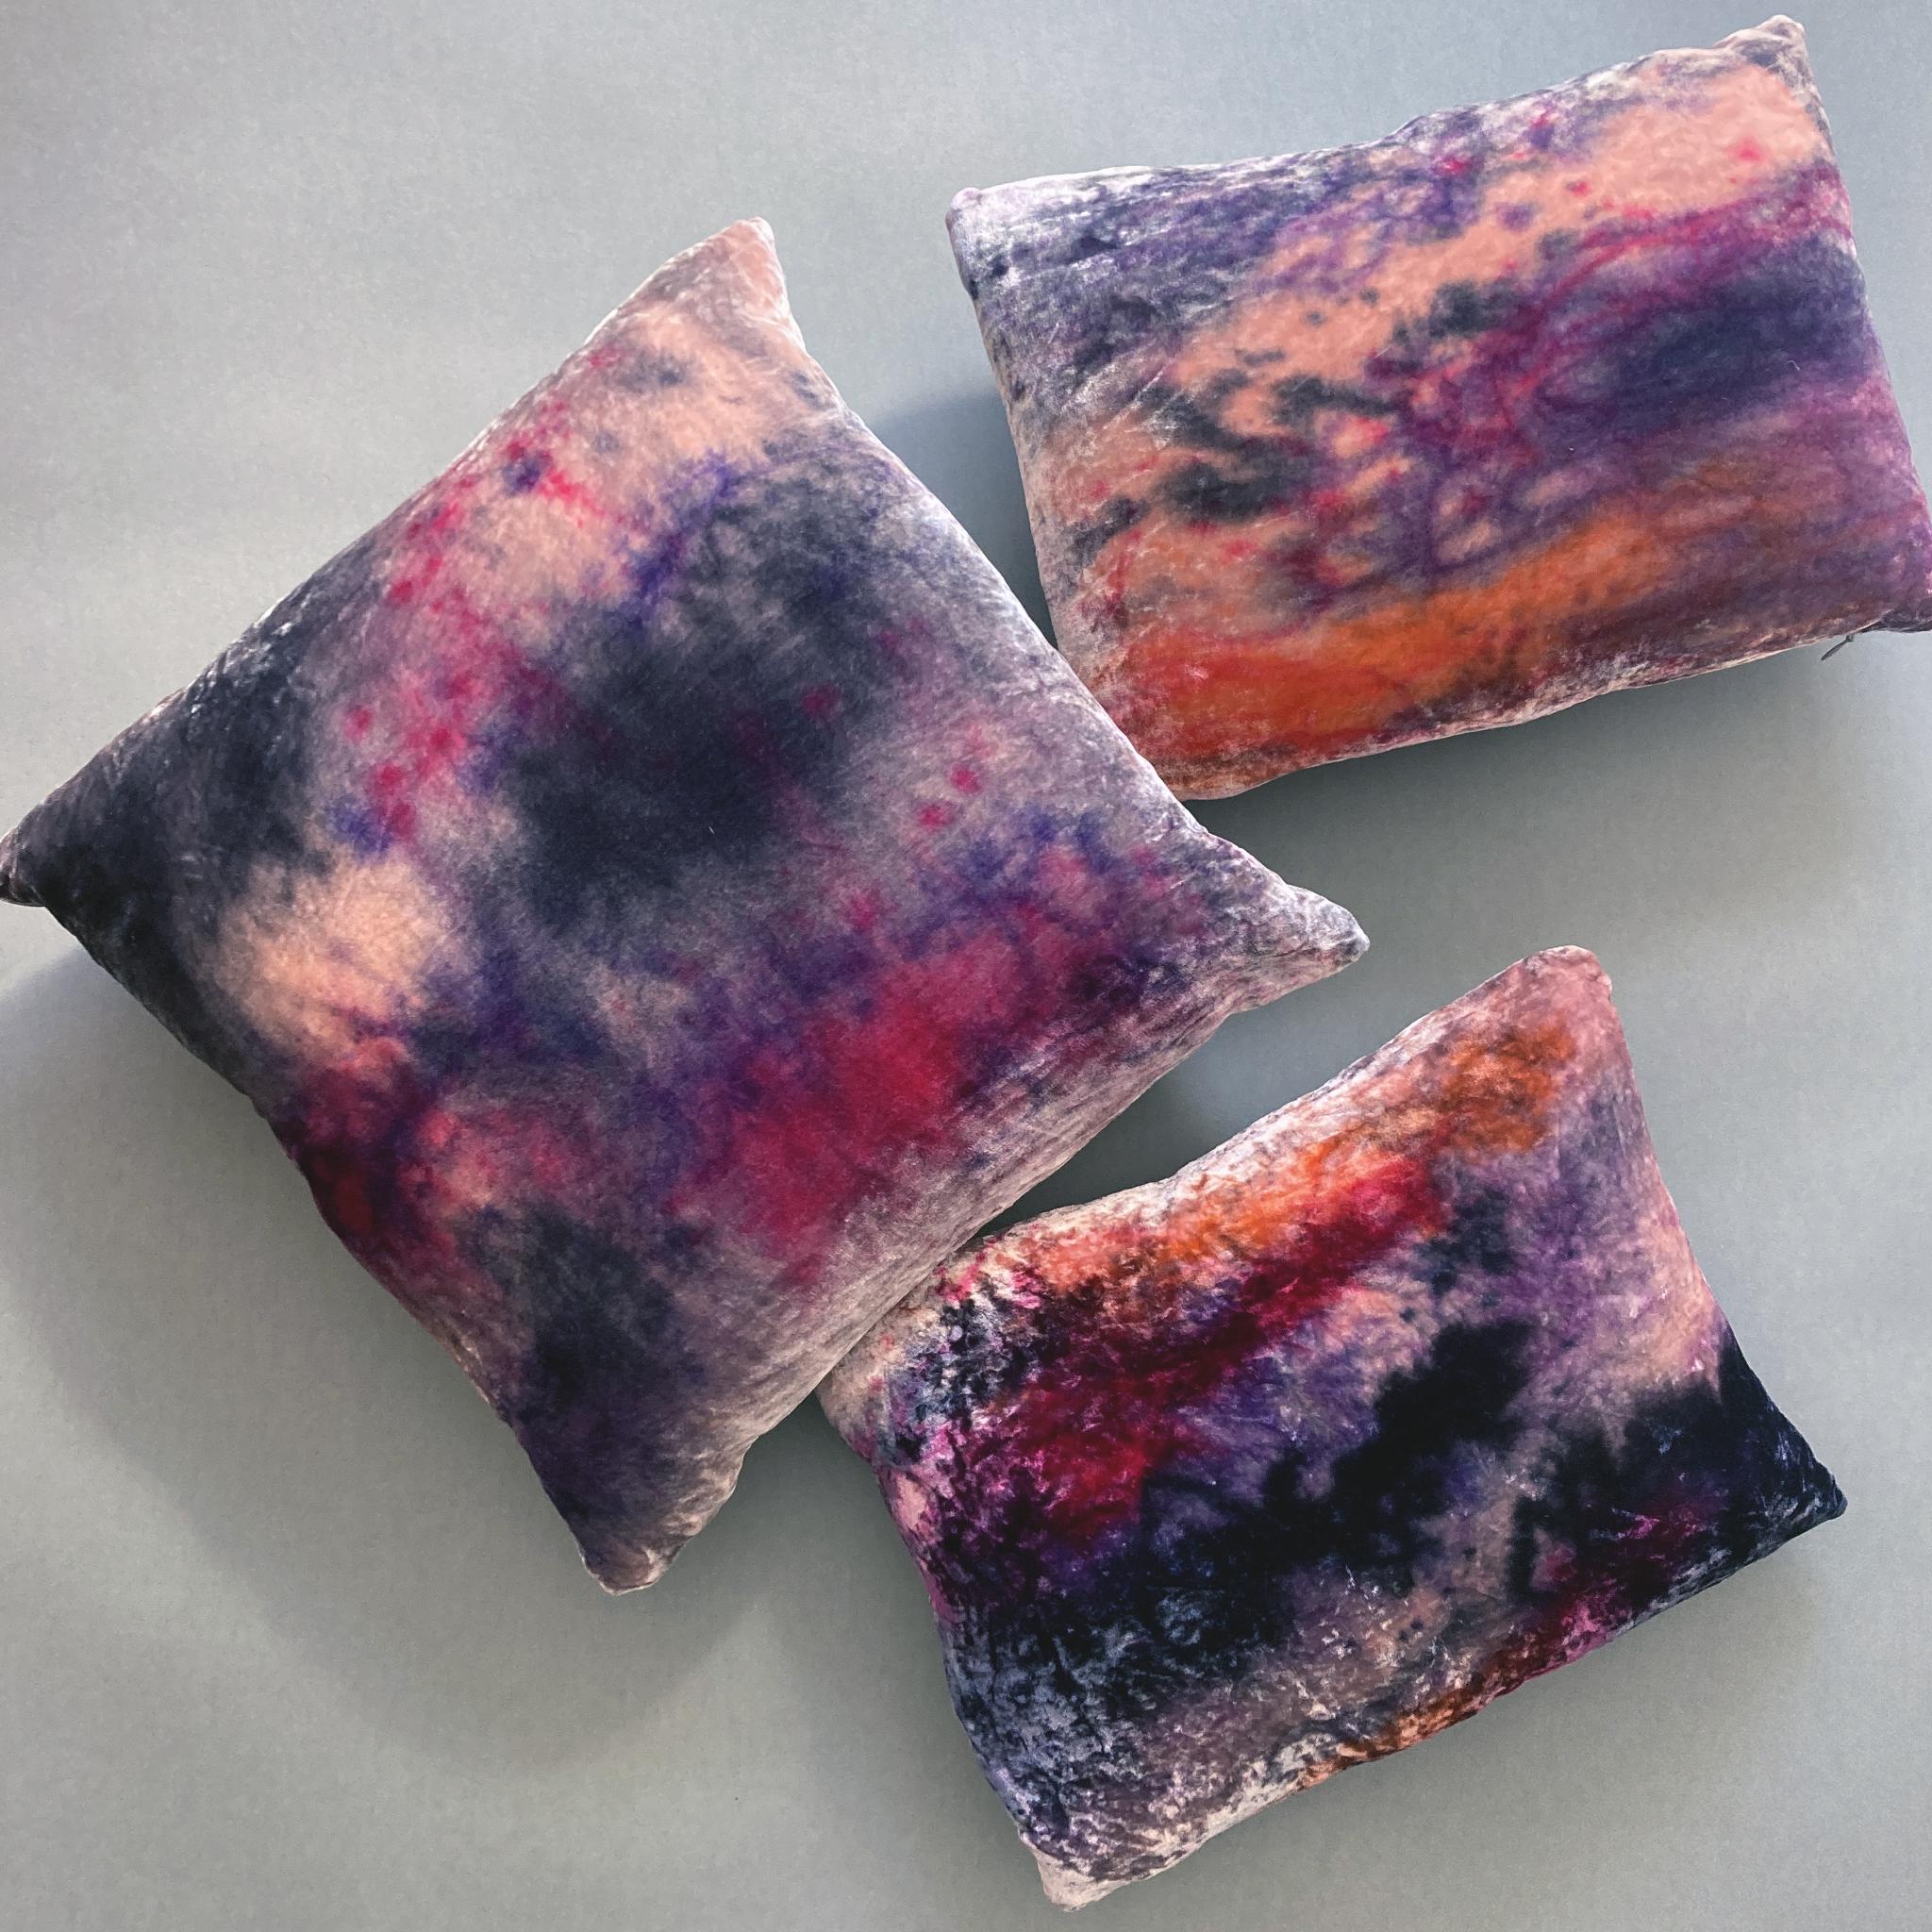 Rose velvet pillow dyed with magenta, purple, orange, blush and navy in an abstract pattern with gray linen backing. Hand-painted and sewn in New York City, down pillow insert made locally in NYC. Pillow measures 12 x 16 inches. Each velvet pillow